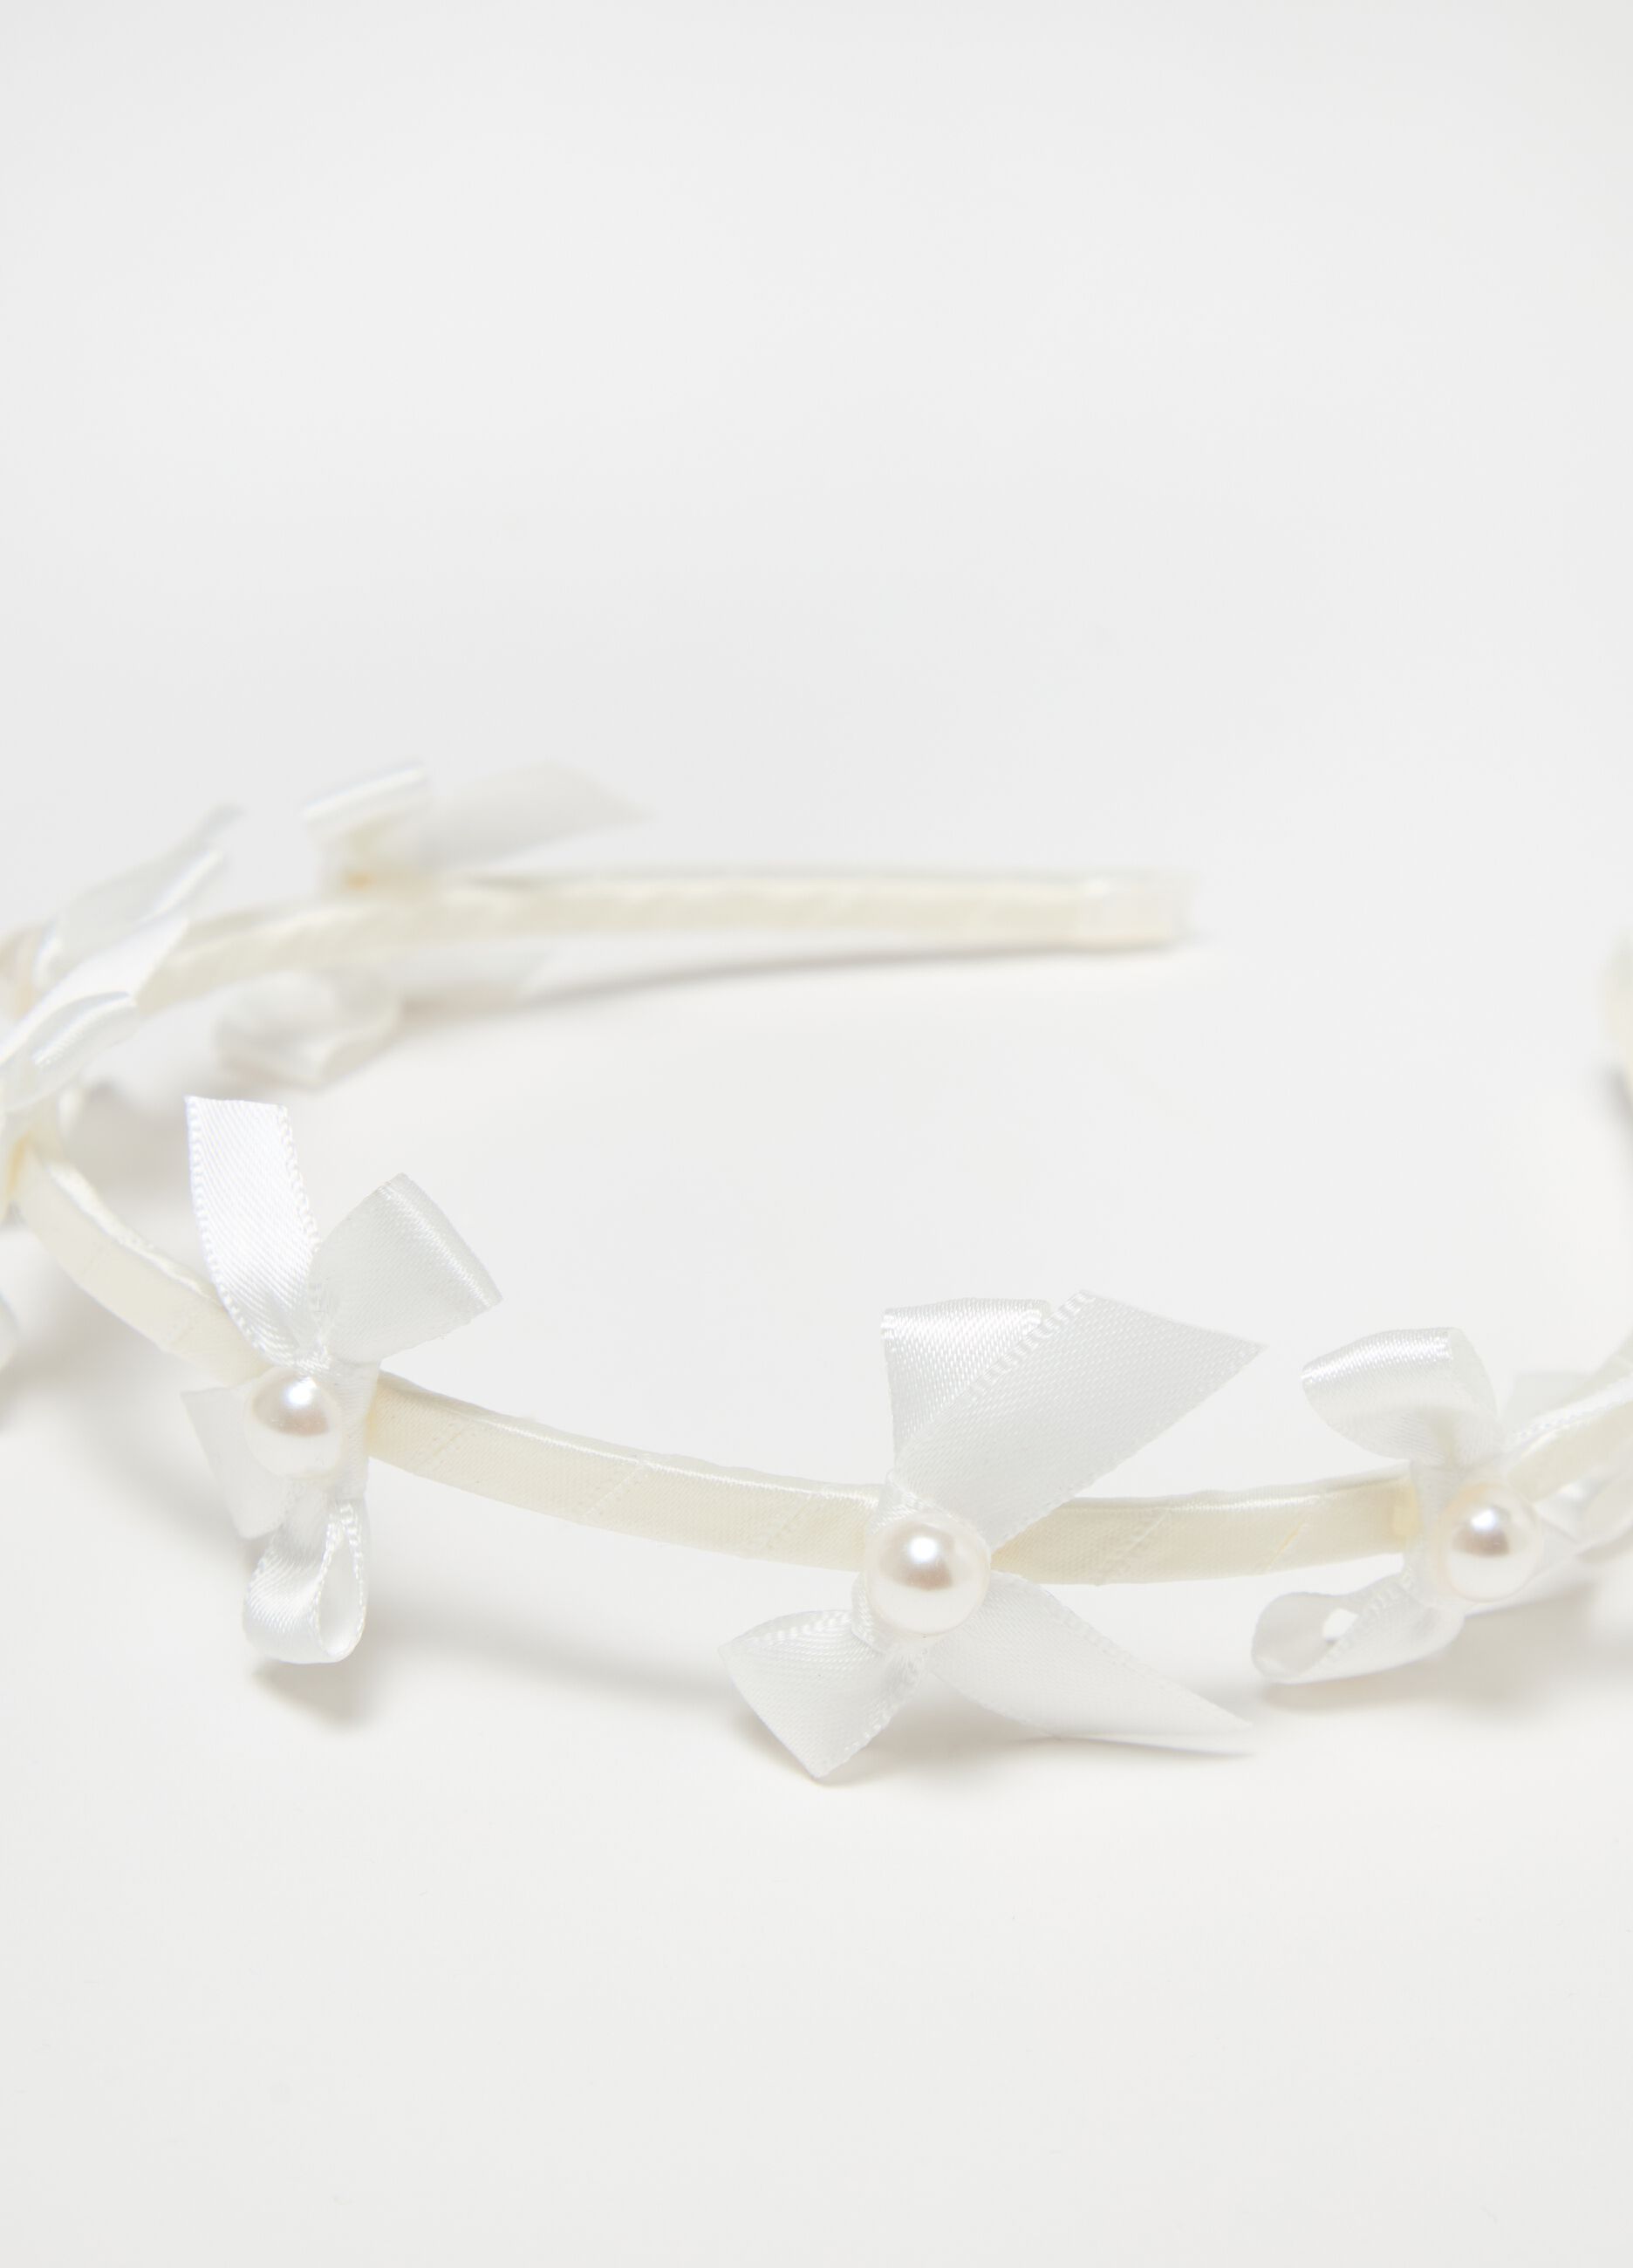 Alice band with bows and beads